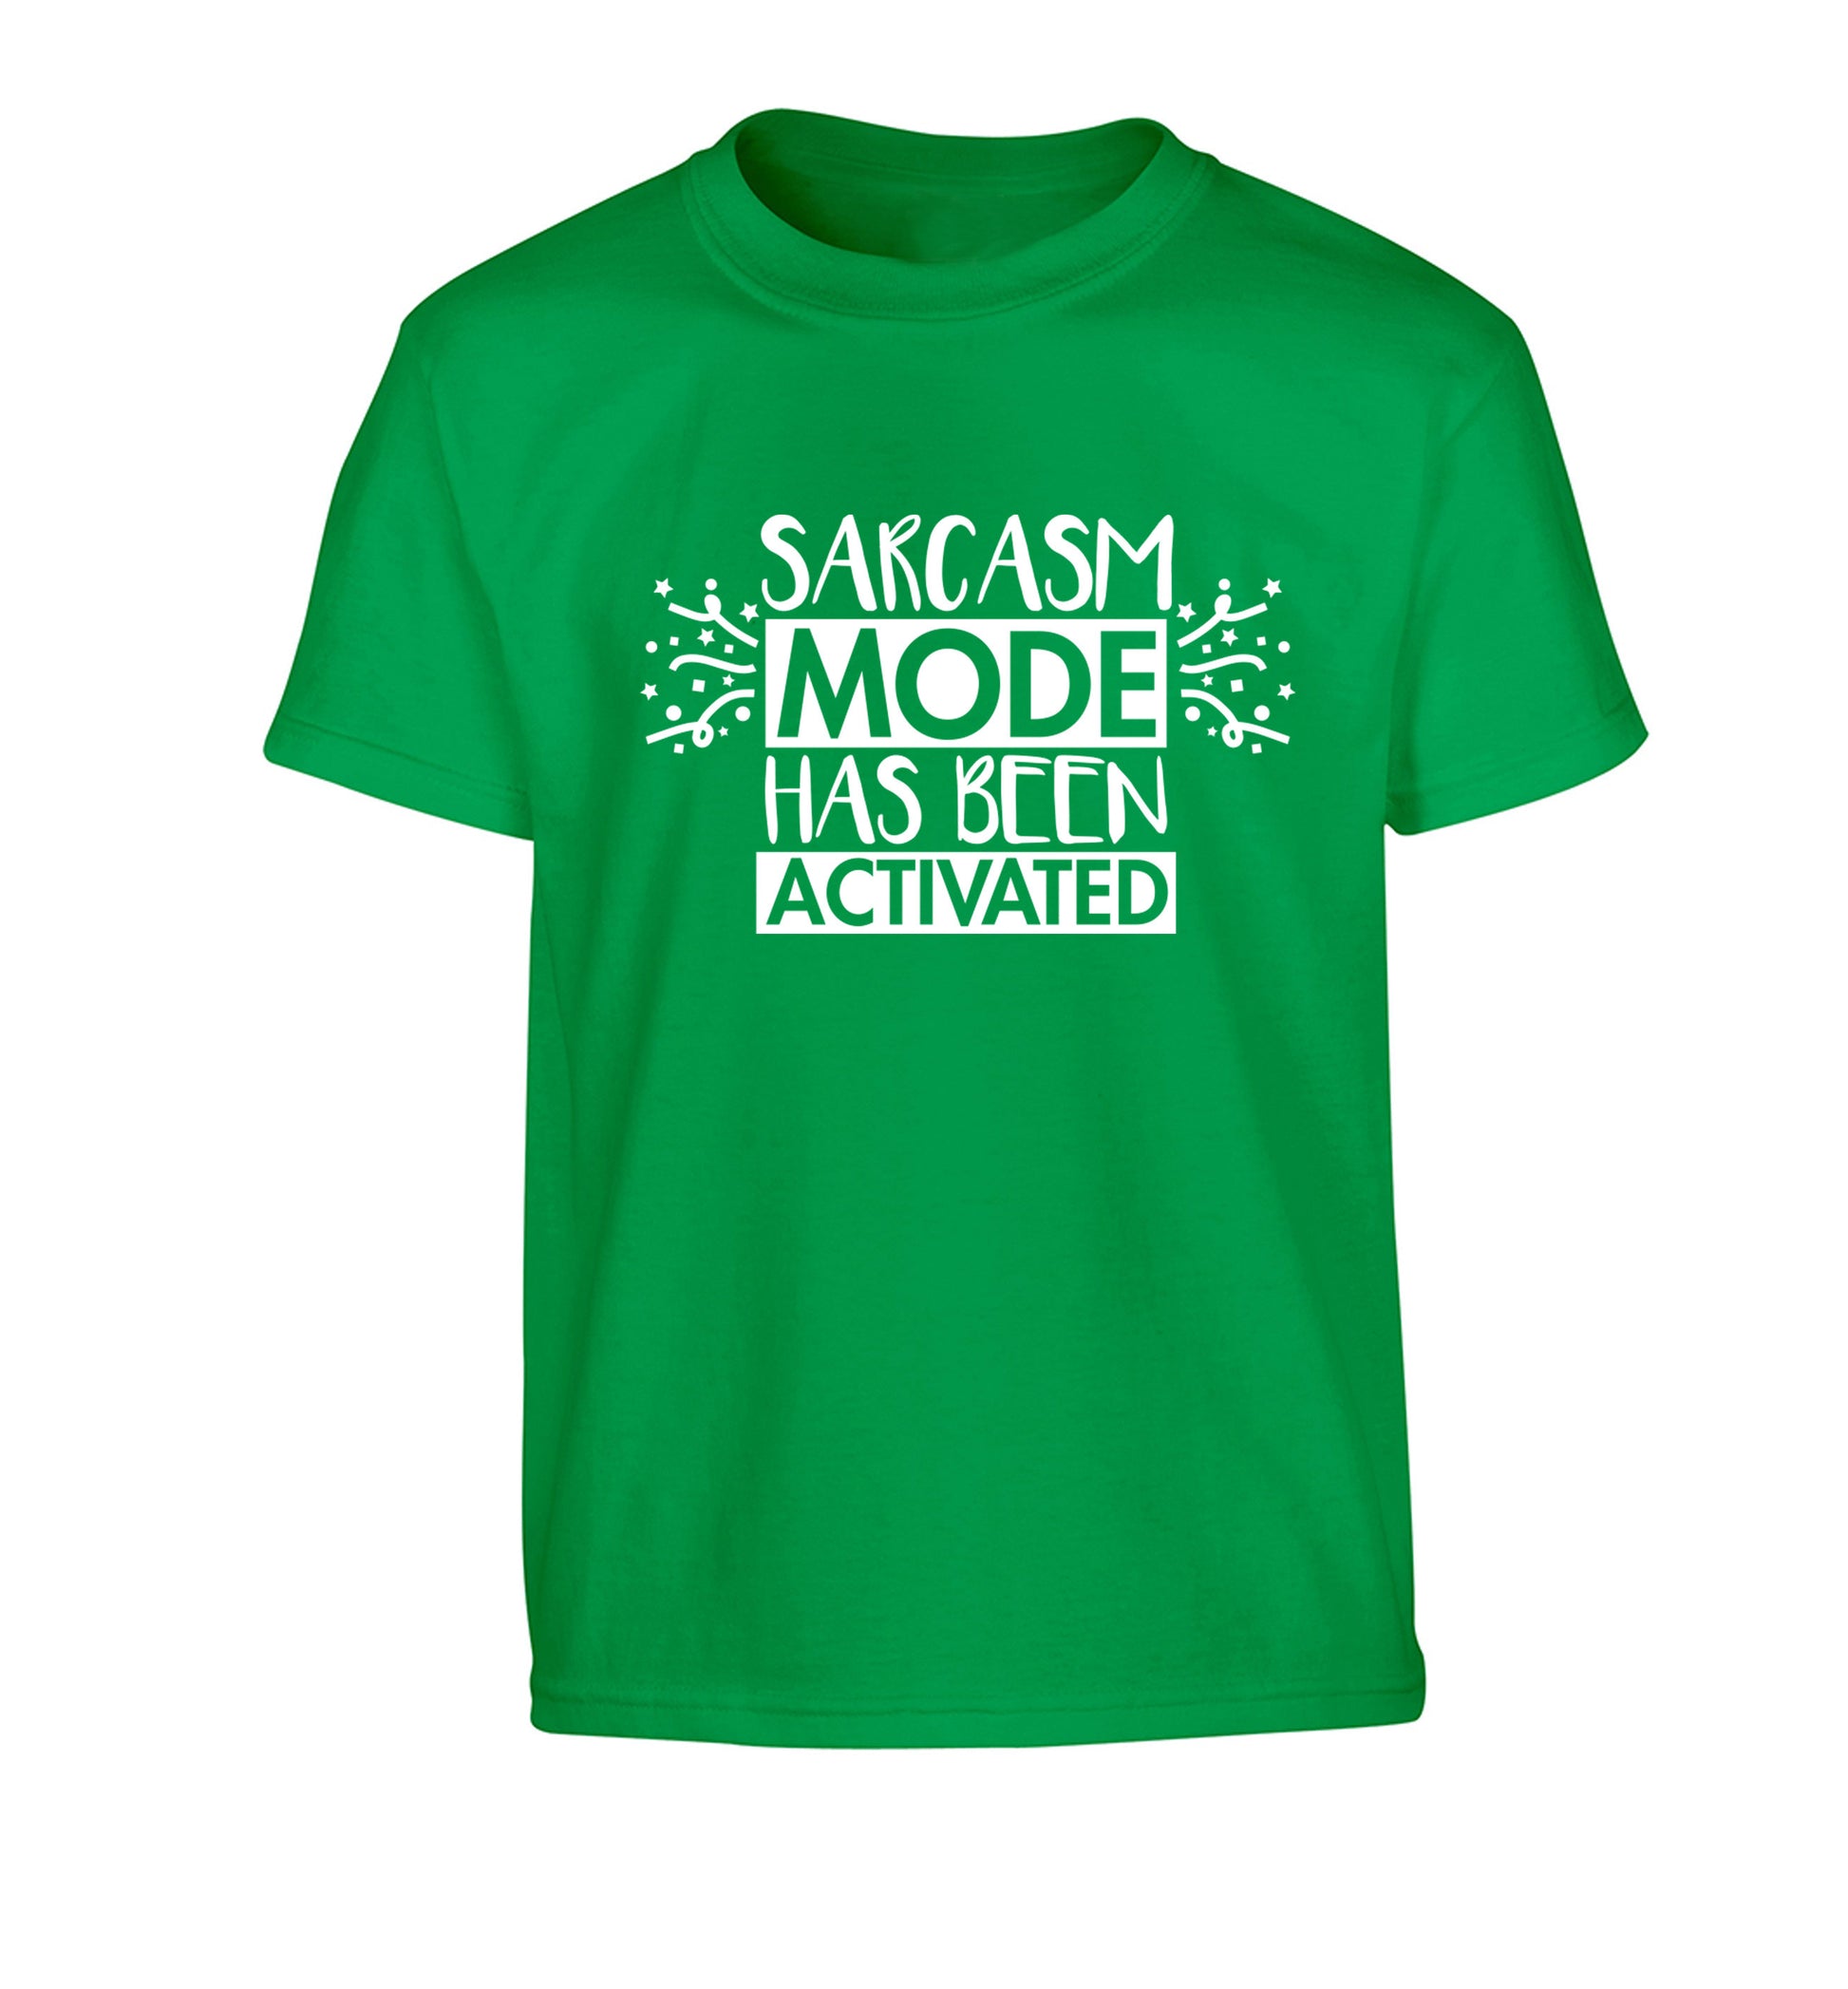 Sarcarsm mode has been activated Children's green Tshirt 12-14 Years